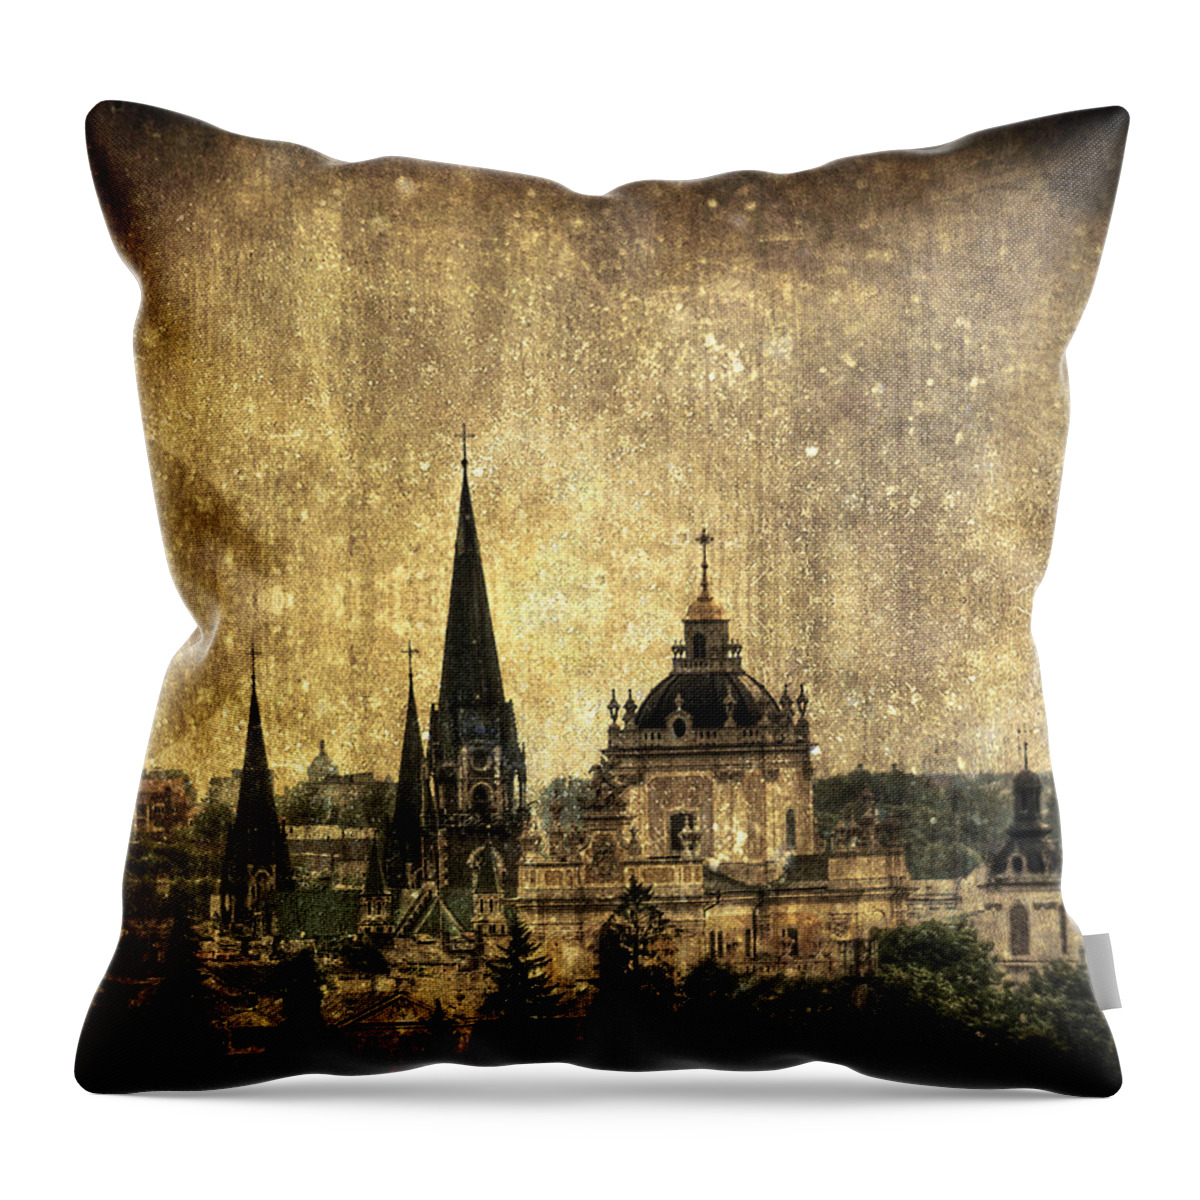 Texture Throw Pillow featuring the photograph Reach Out by Evelina Kremsdorf